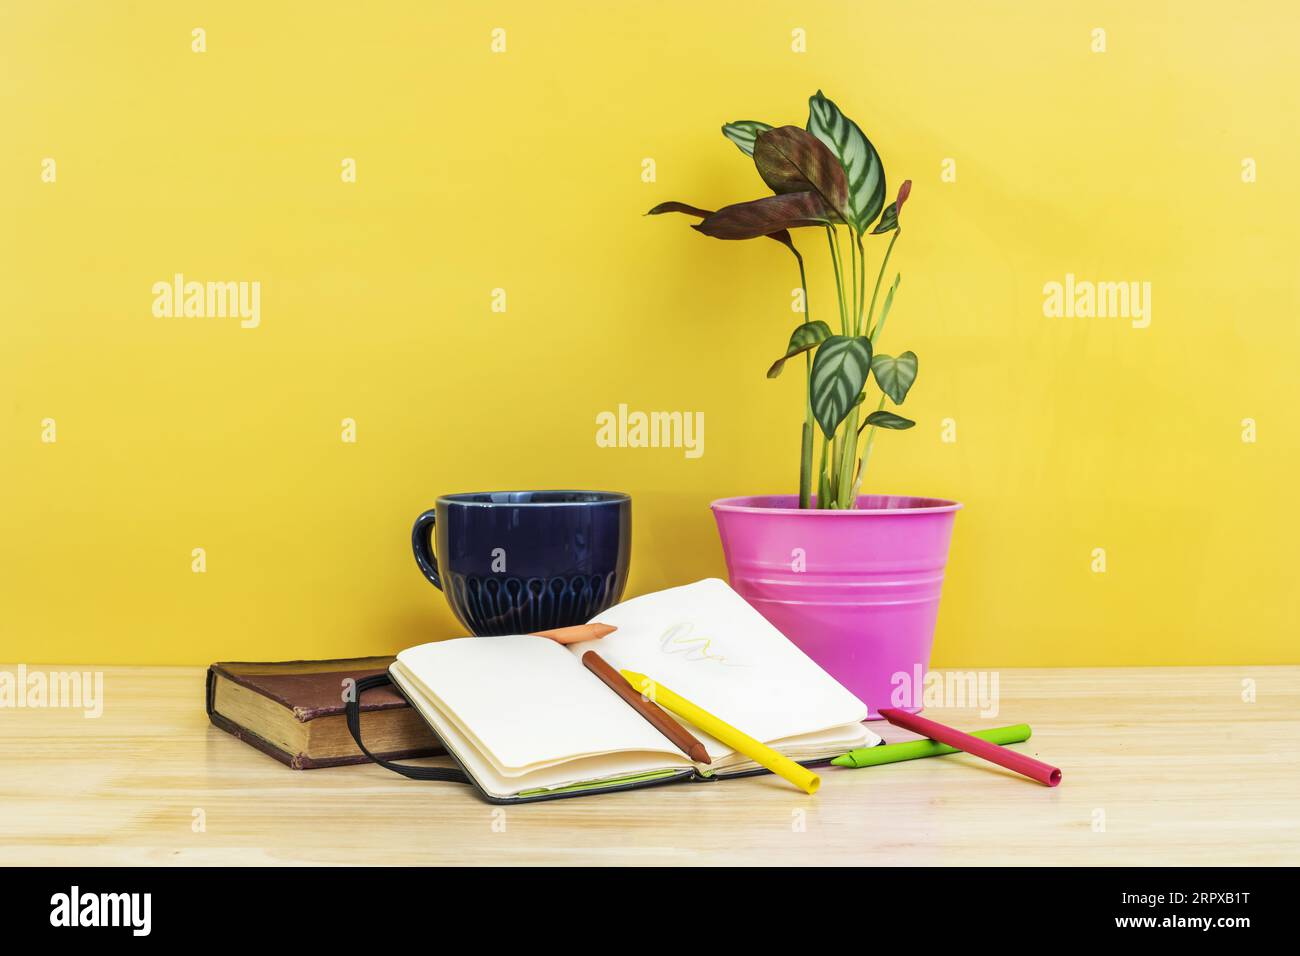 Still life with a plant in a pink pot, a note pad with colored pencils and lots of light Stock Photo